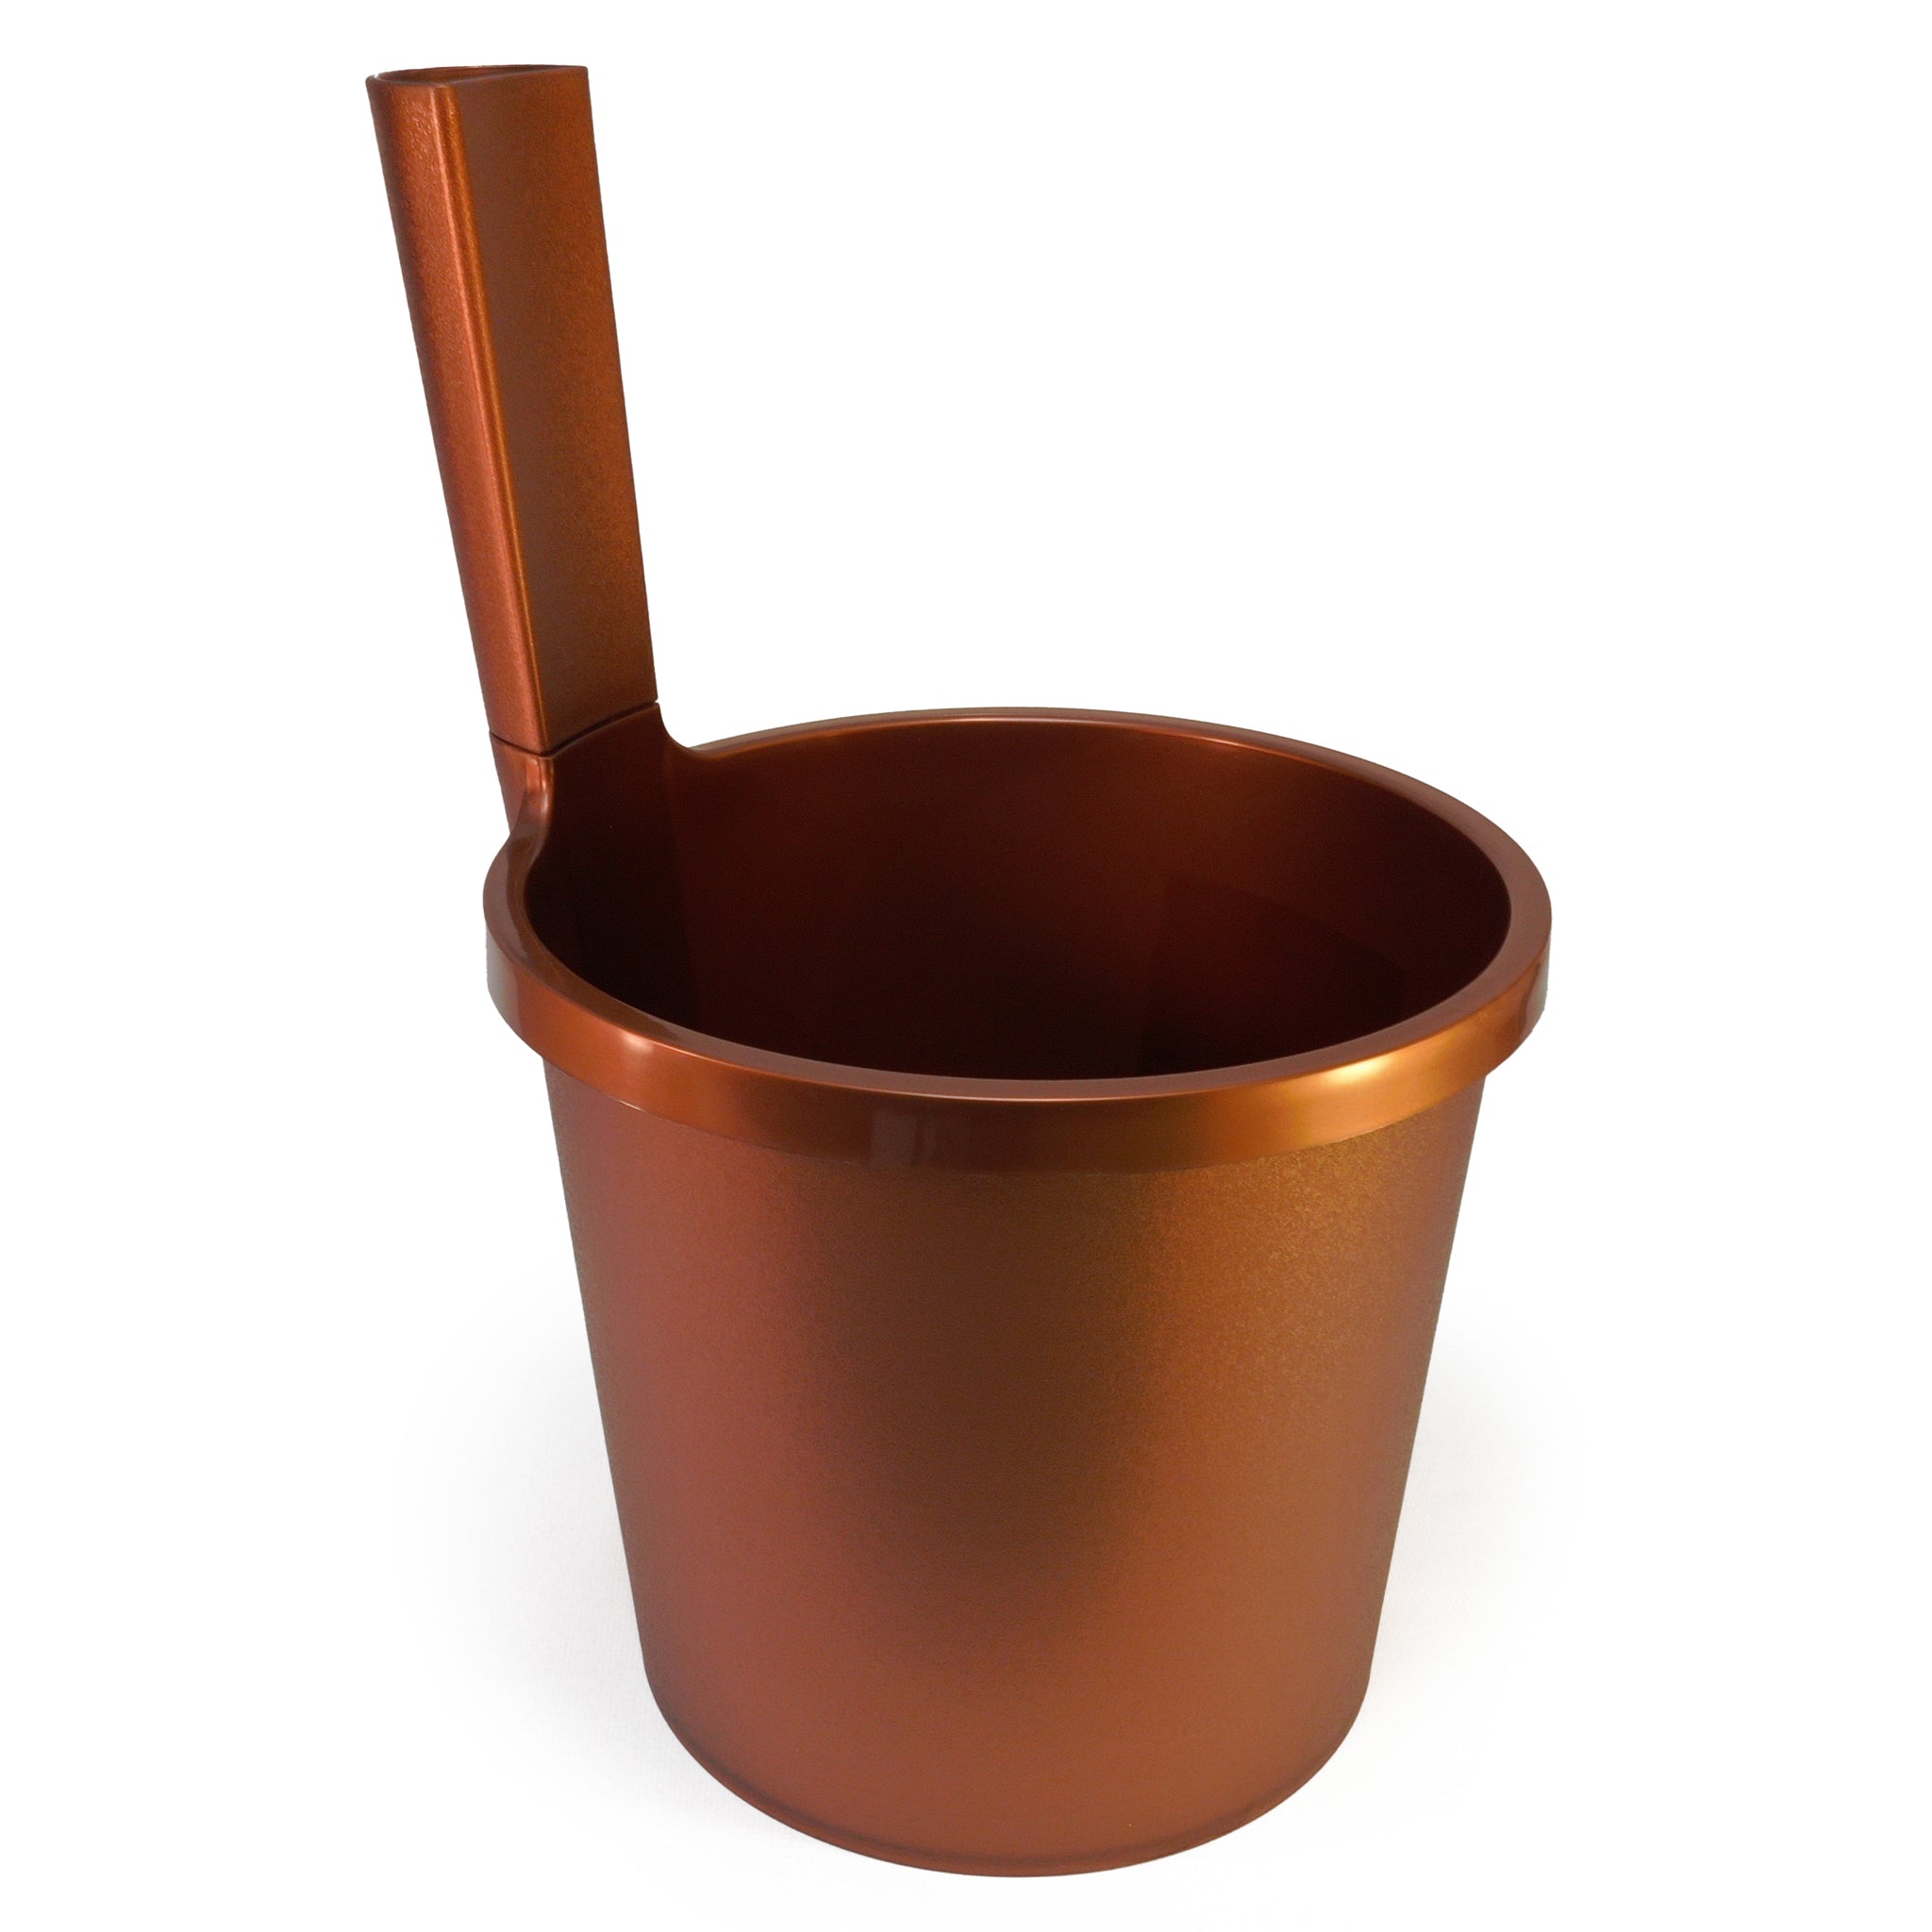 Copper colored plastic bucket on white background